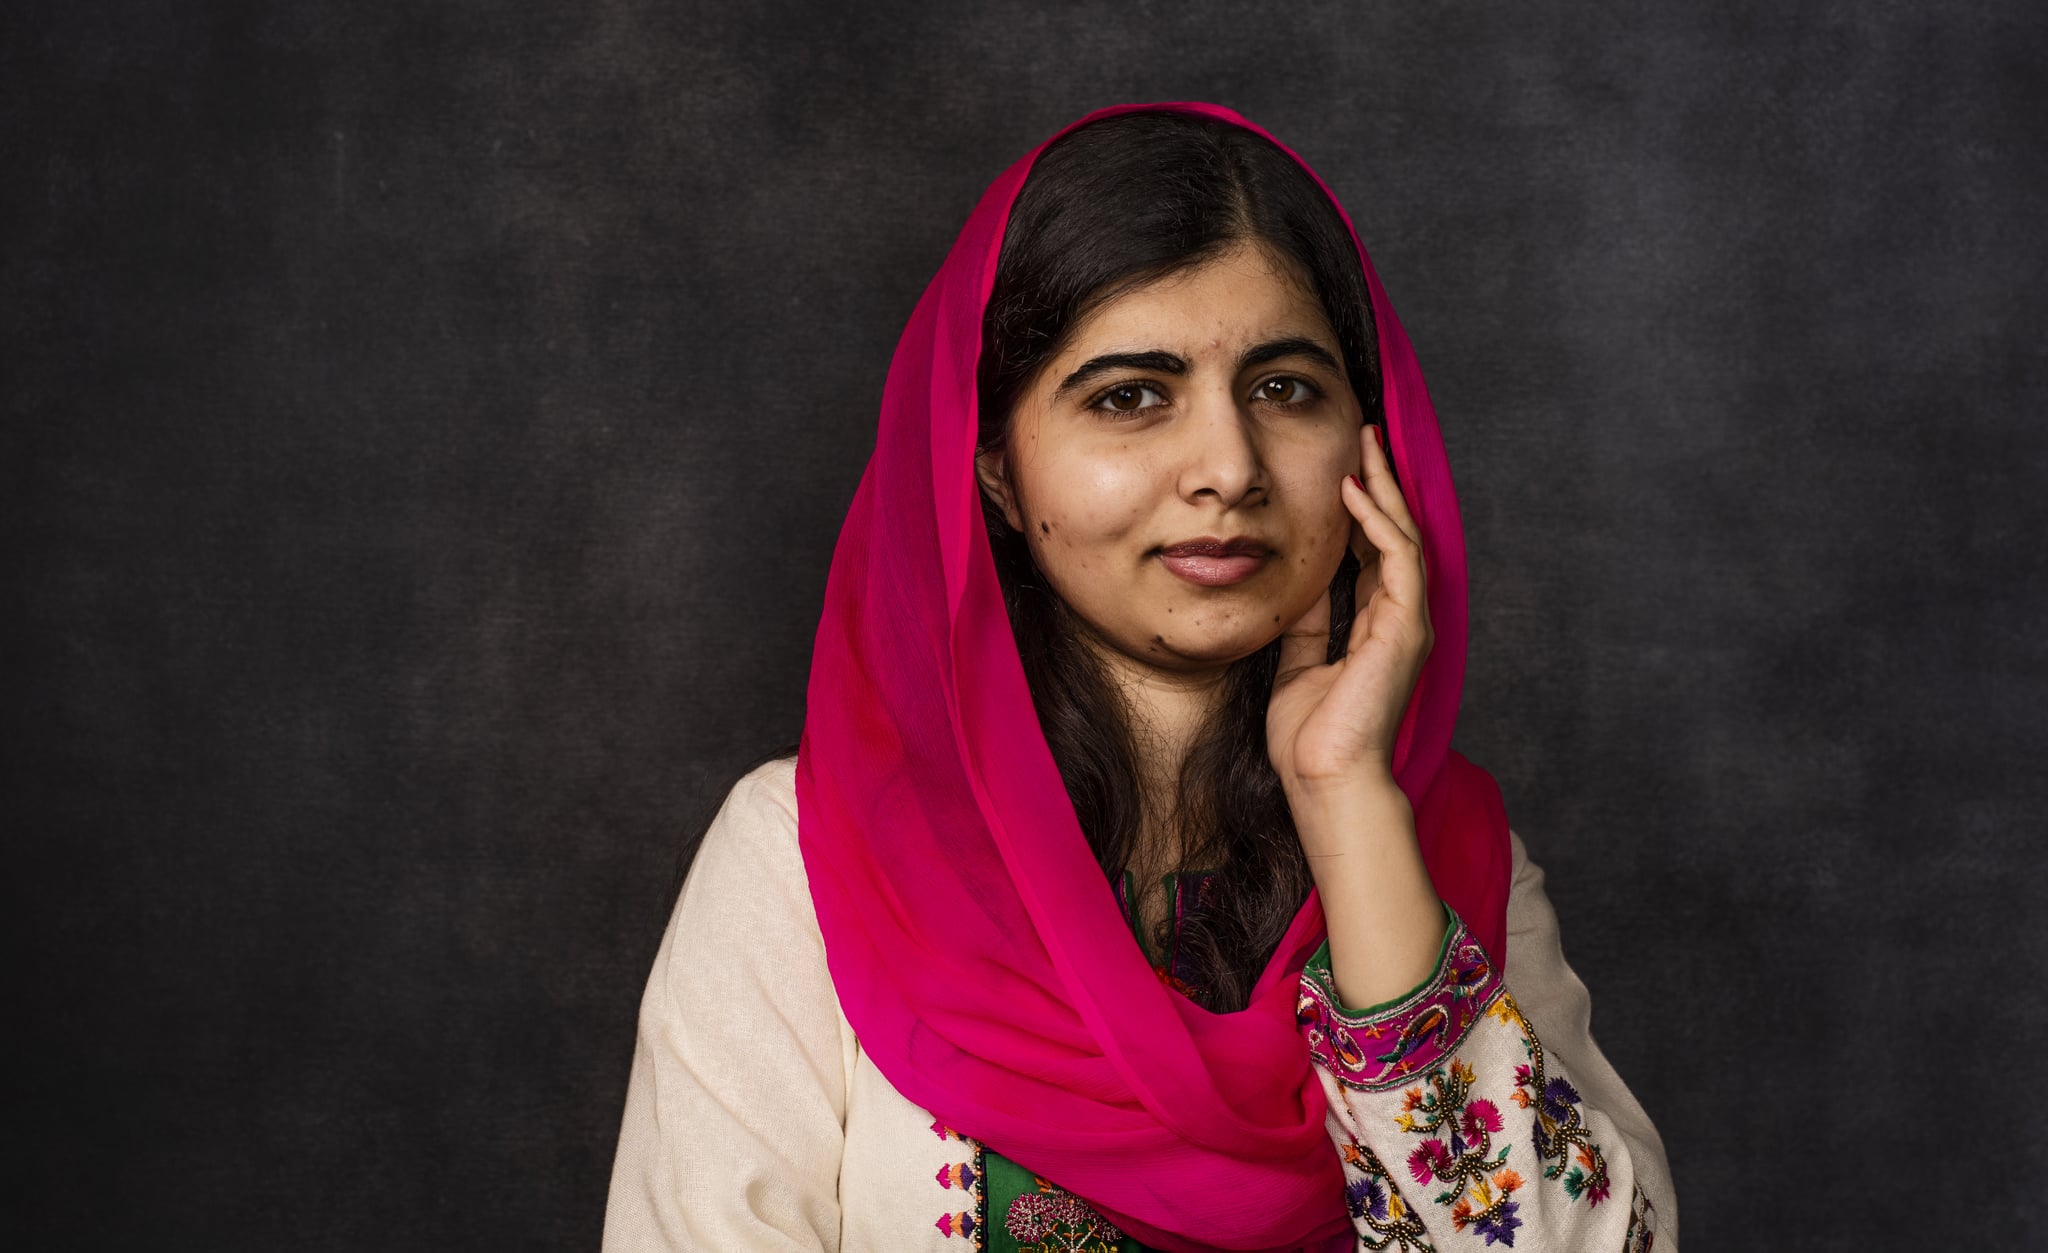 (AUSTRALIA OUT) Malala Yousafzai is a Pakistani activist for female education and the youngest Nobel laureate. She is in Sydney for a speaking engagement, December 13, 2018. (Photo by Louise Kennerley/Fairfax Media via Getty Images via Getty Images)